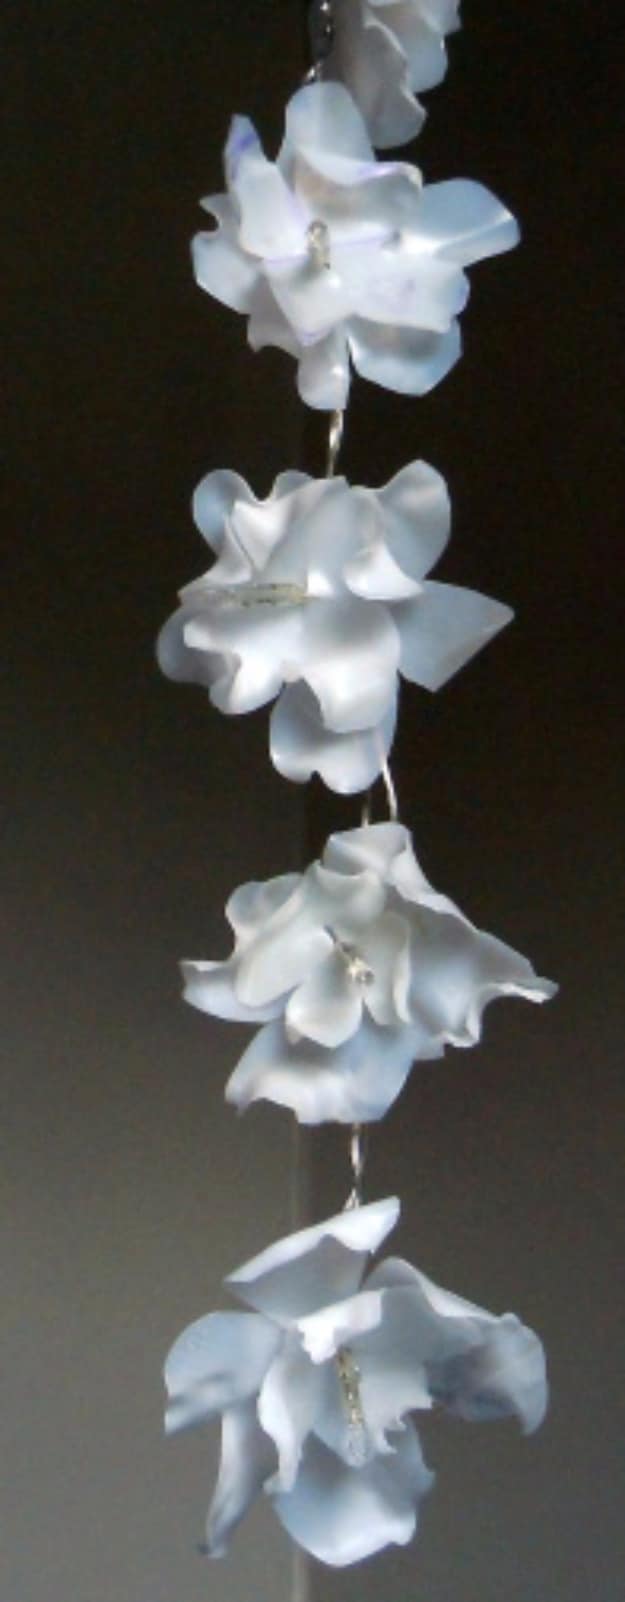 Cool DIY Projects Made With Plastic Bottles - Milk Jug Flower Lights - Best Easy Crafts and DIY Ideas Made With A Recycled Plastic Bottle - Jewlery, Home Decor, Planters, Craft Project Tutorials - Cheap Ways to Decorate and Creative DIY Gifts for Christmas Holidays - Fun Projects for Adults, Teens and Kids 